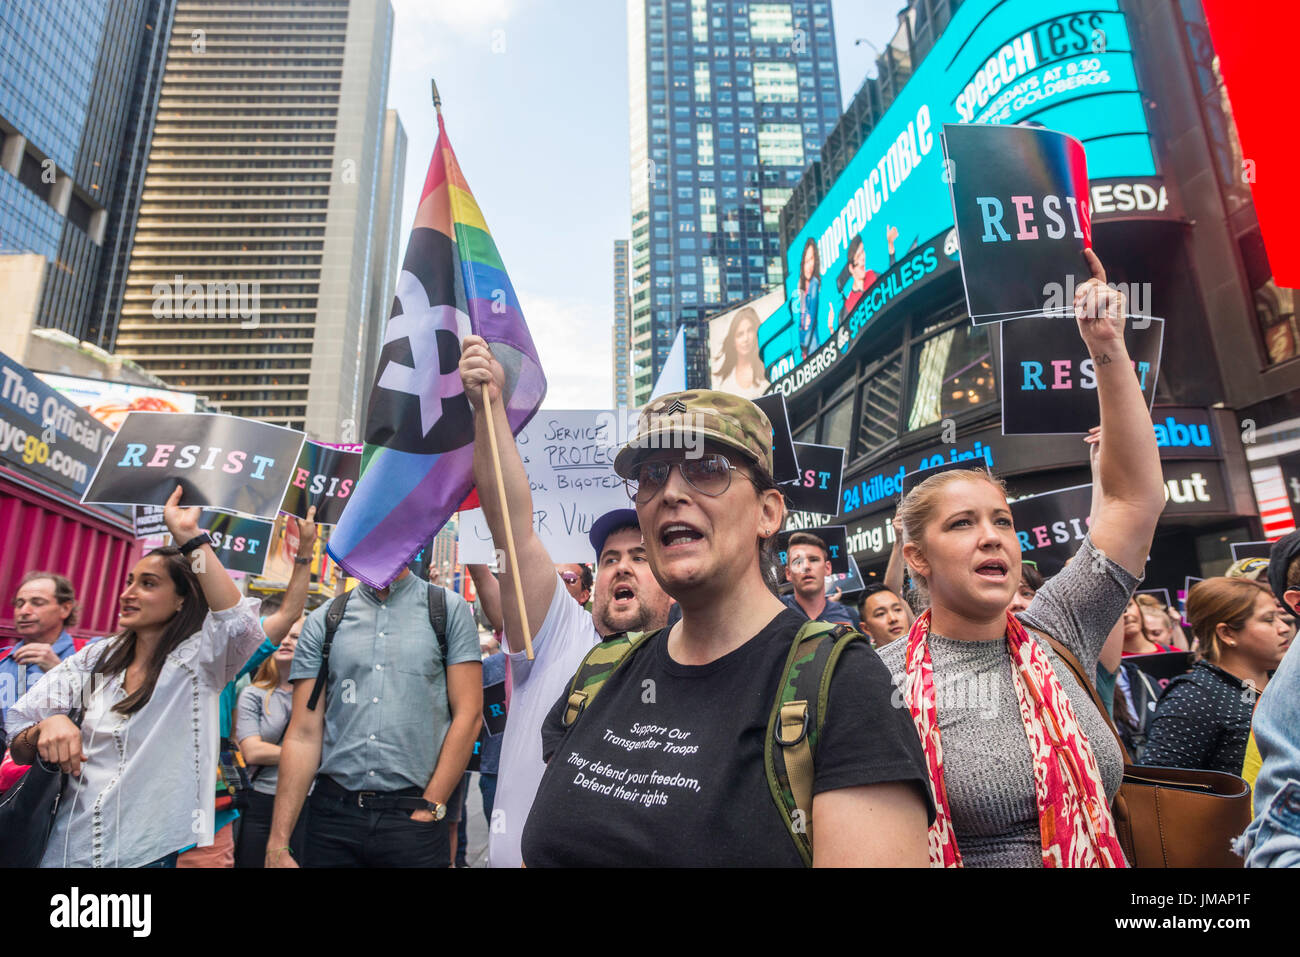 New York, NY 26 July 2017 In response to President Donald Trump's tweet to ban transgender people from the military, advocates, activists, and allies converged on the Military Recruitment Center in Times Square in protest. ©Stacy Walsh Rosenstock/Alamy Live News Stock Photo